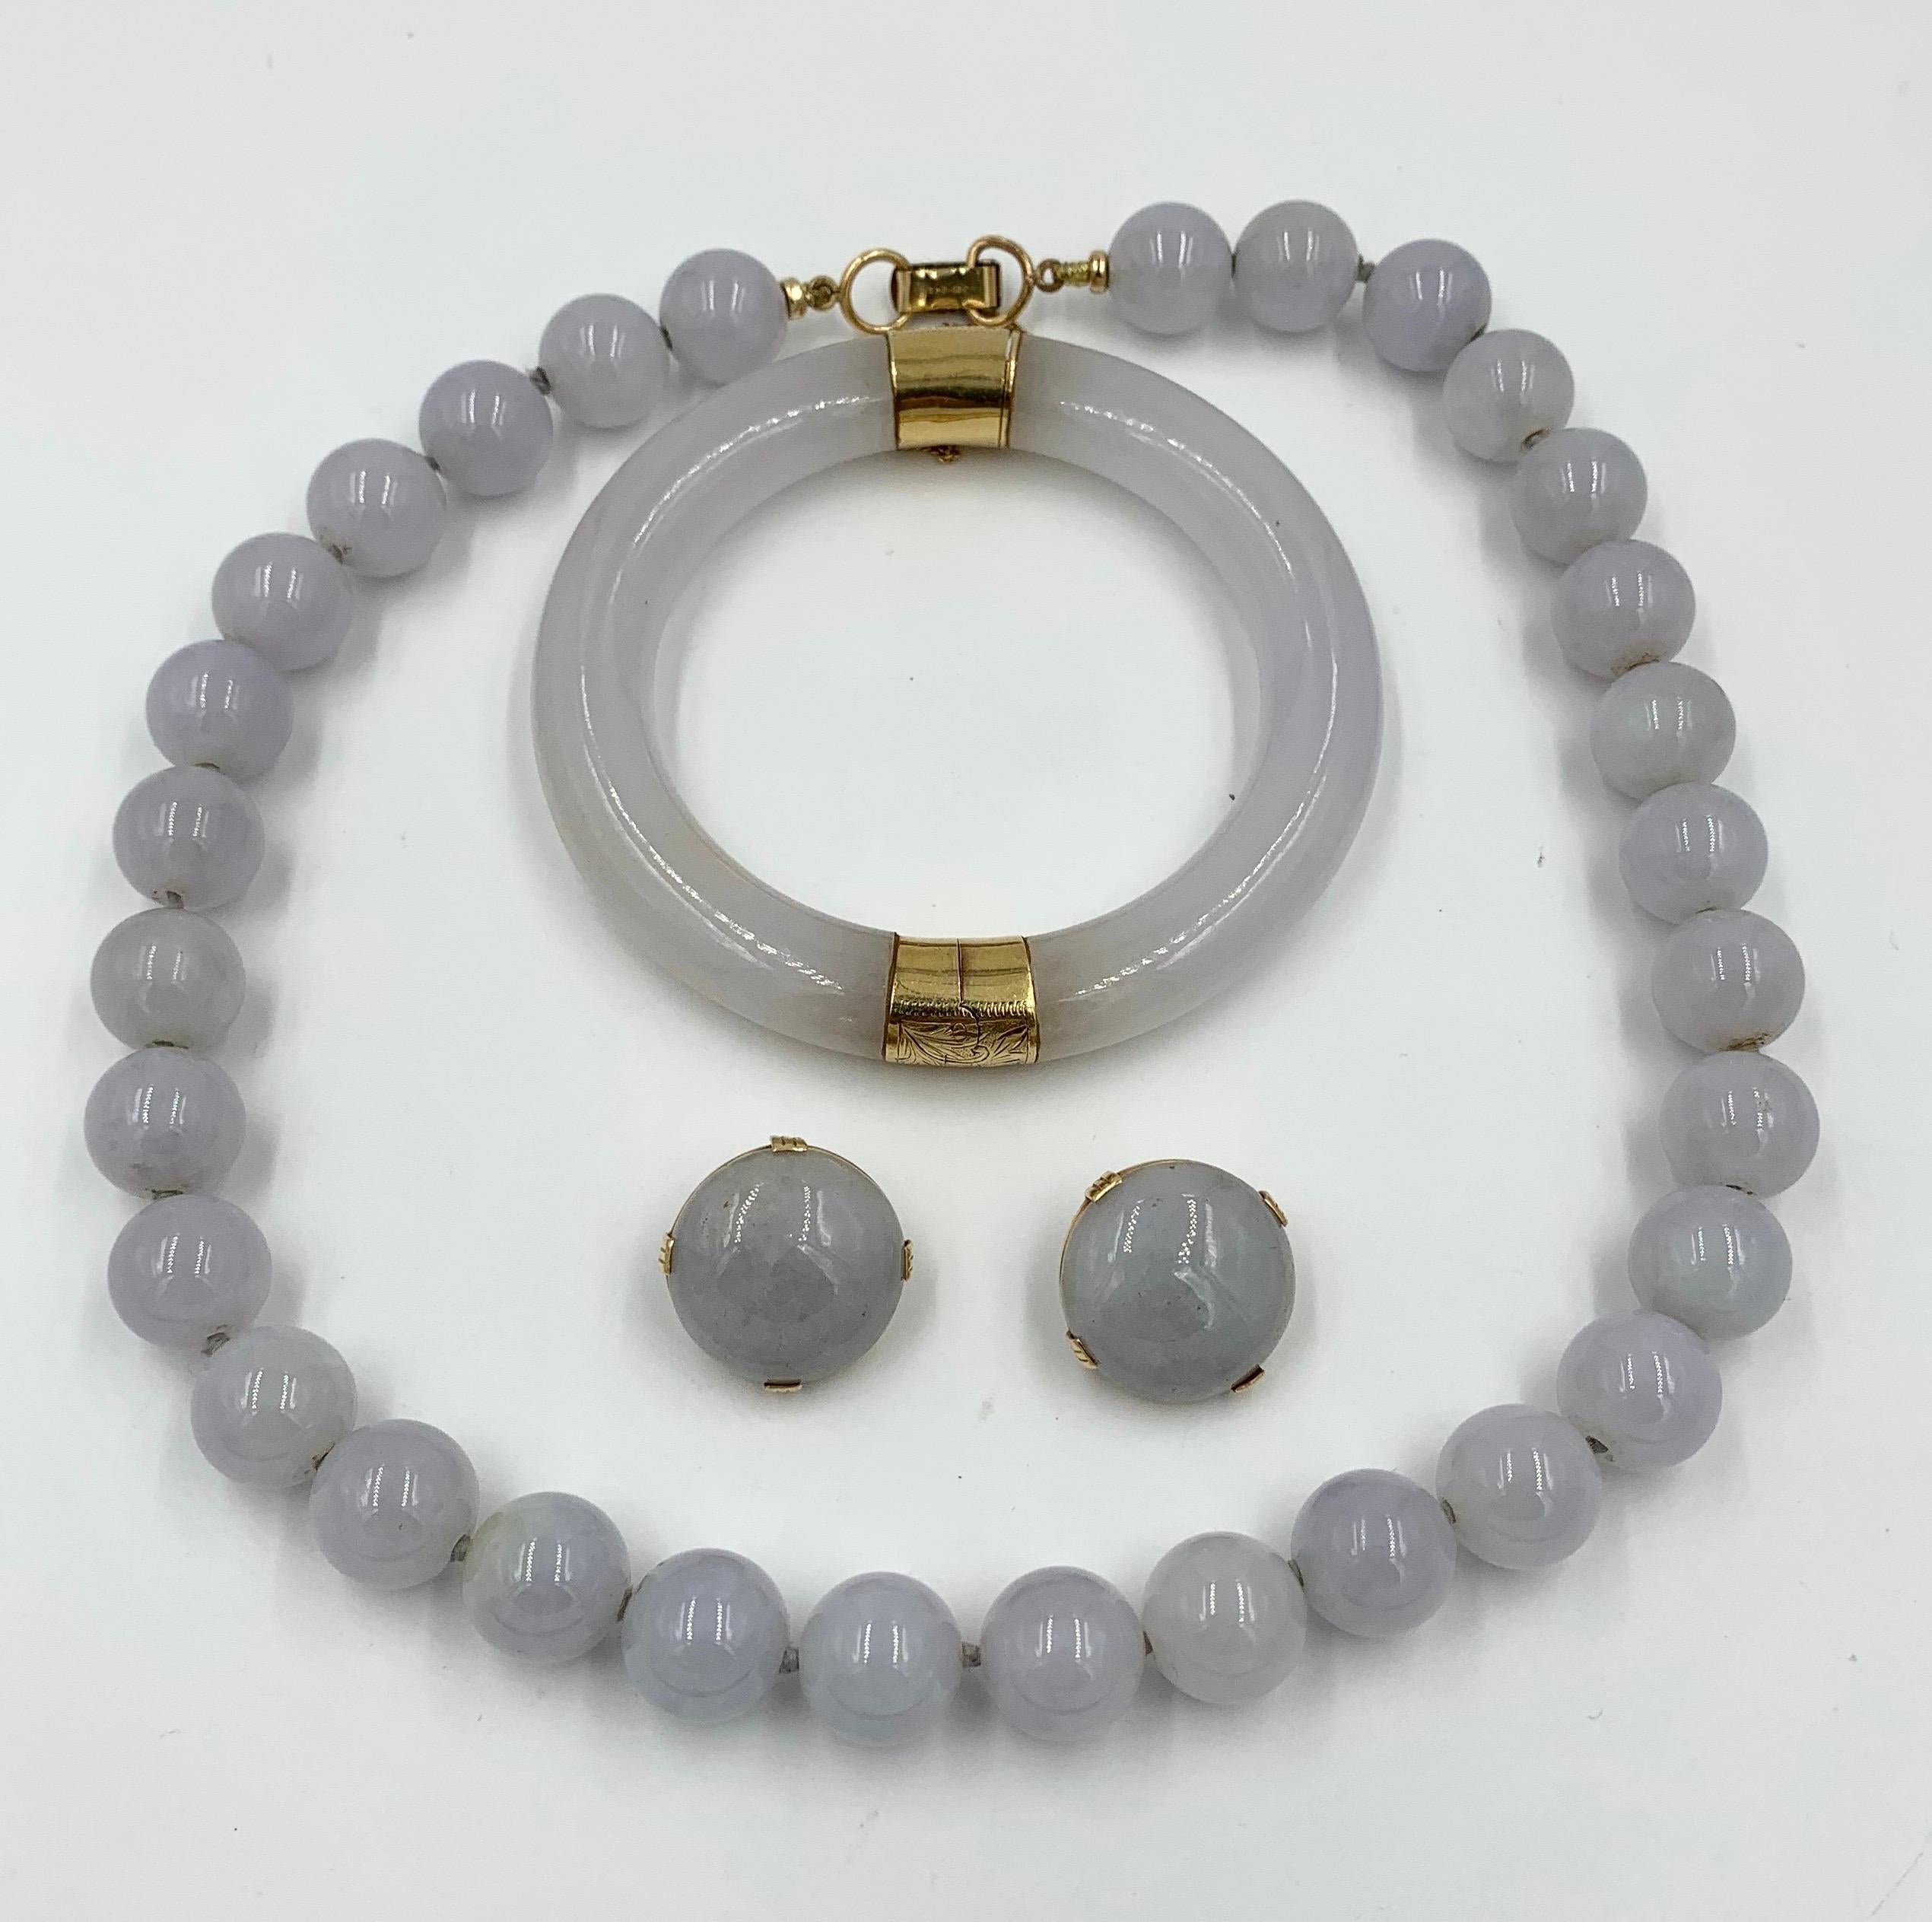 A spectacular and rare Ming's Lavender Jade Suite.   The suite comprising a necklace, earrings and bangle bracelet.  The highly coveted Ming's jade jewelry of Hawaii is becoming exceedingly difficult to find.   And here we have a suite.

Bangle